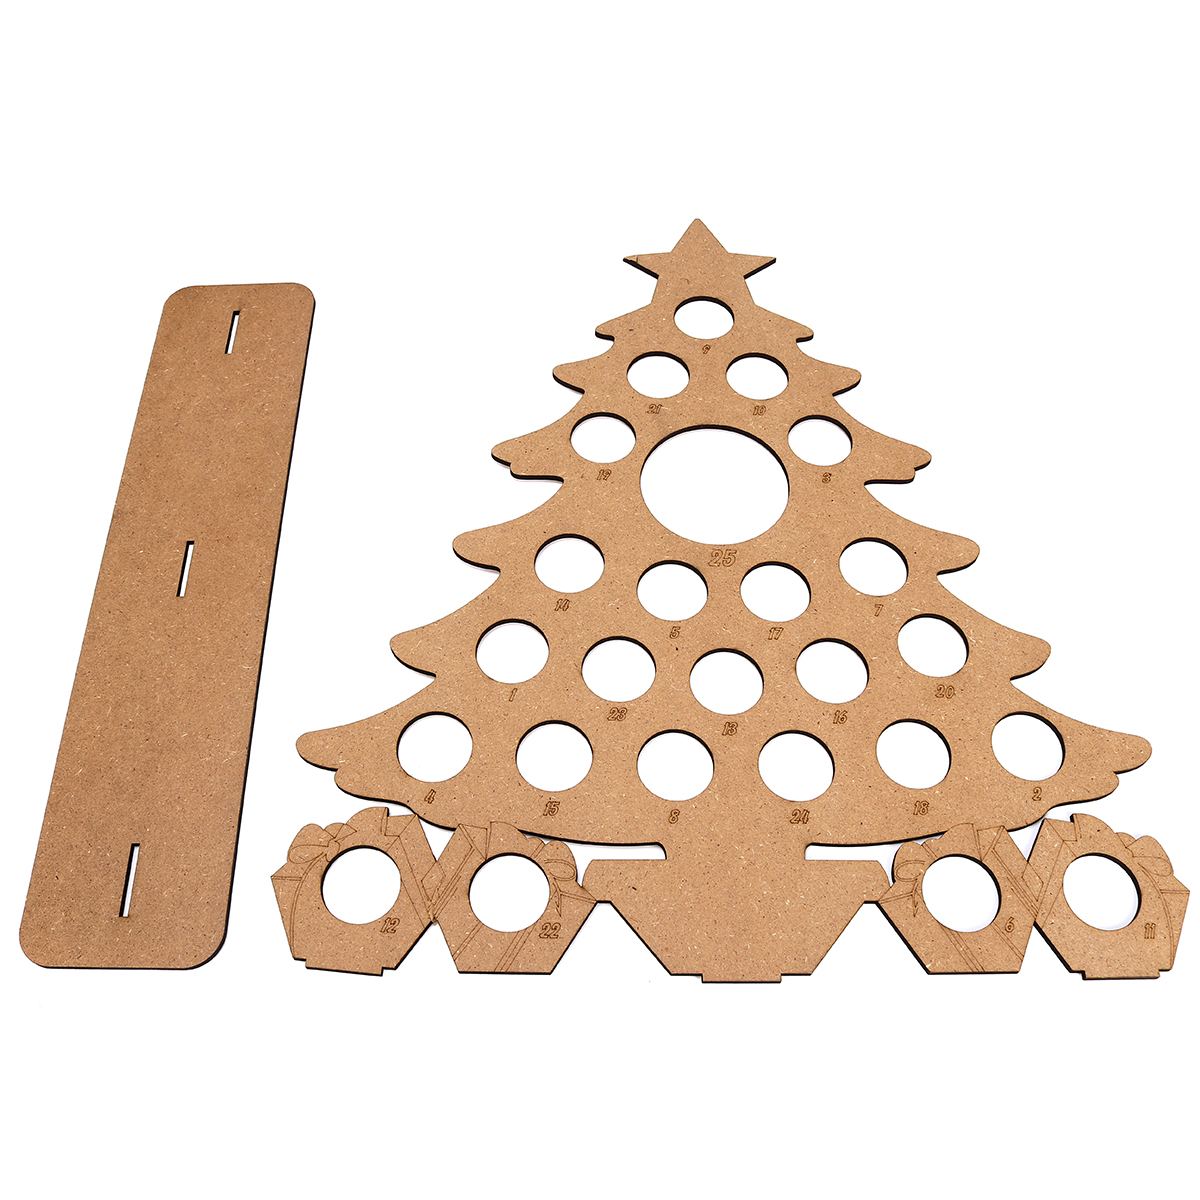 Wooden-Christmas-Advent-Calendar-Christmas-Tree-Decoration-Fits-25-Circular-Chocolates-Candy-Stand-R-1587861-6